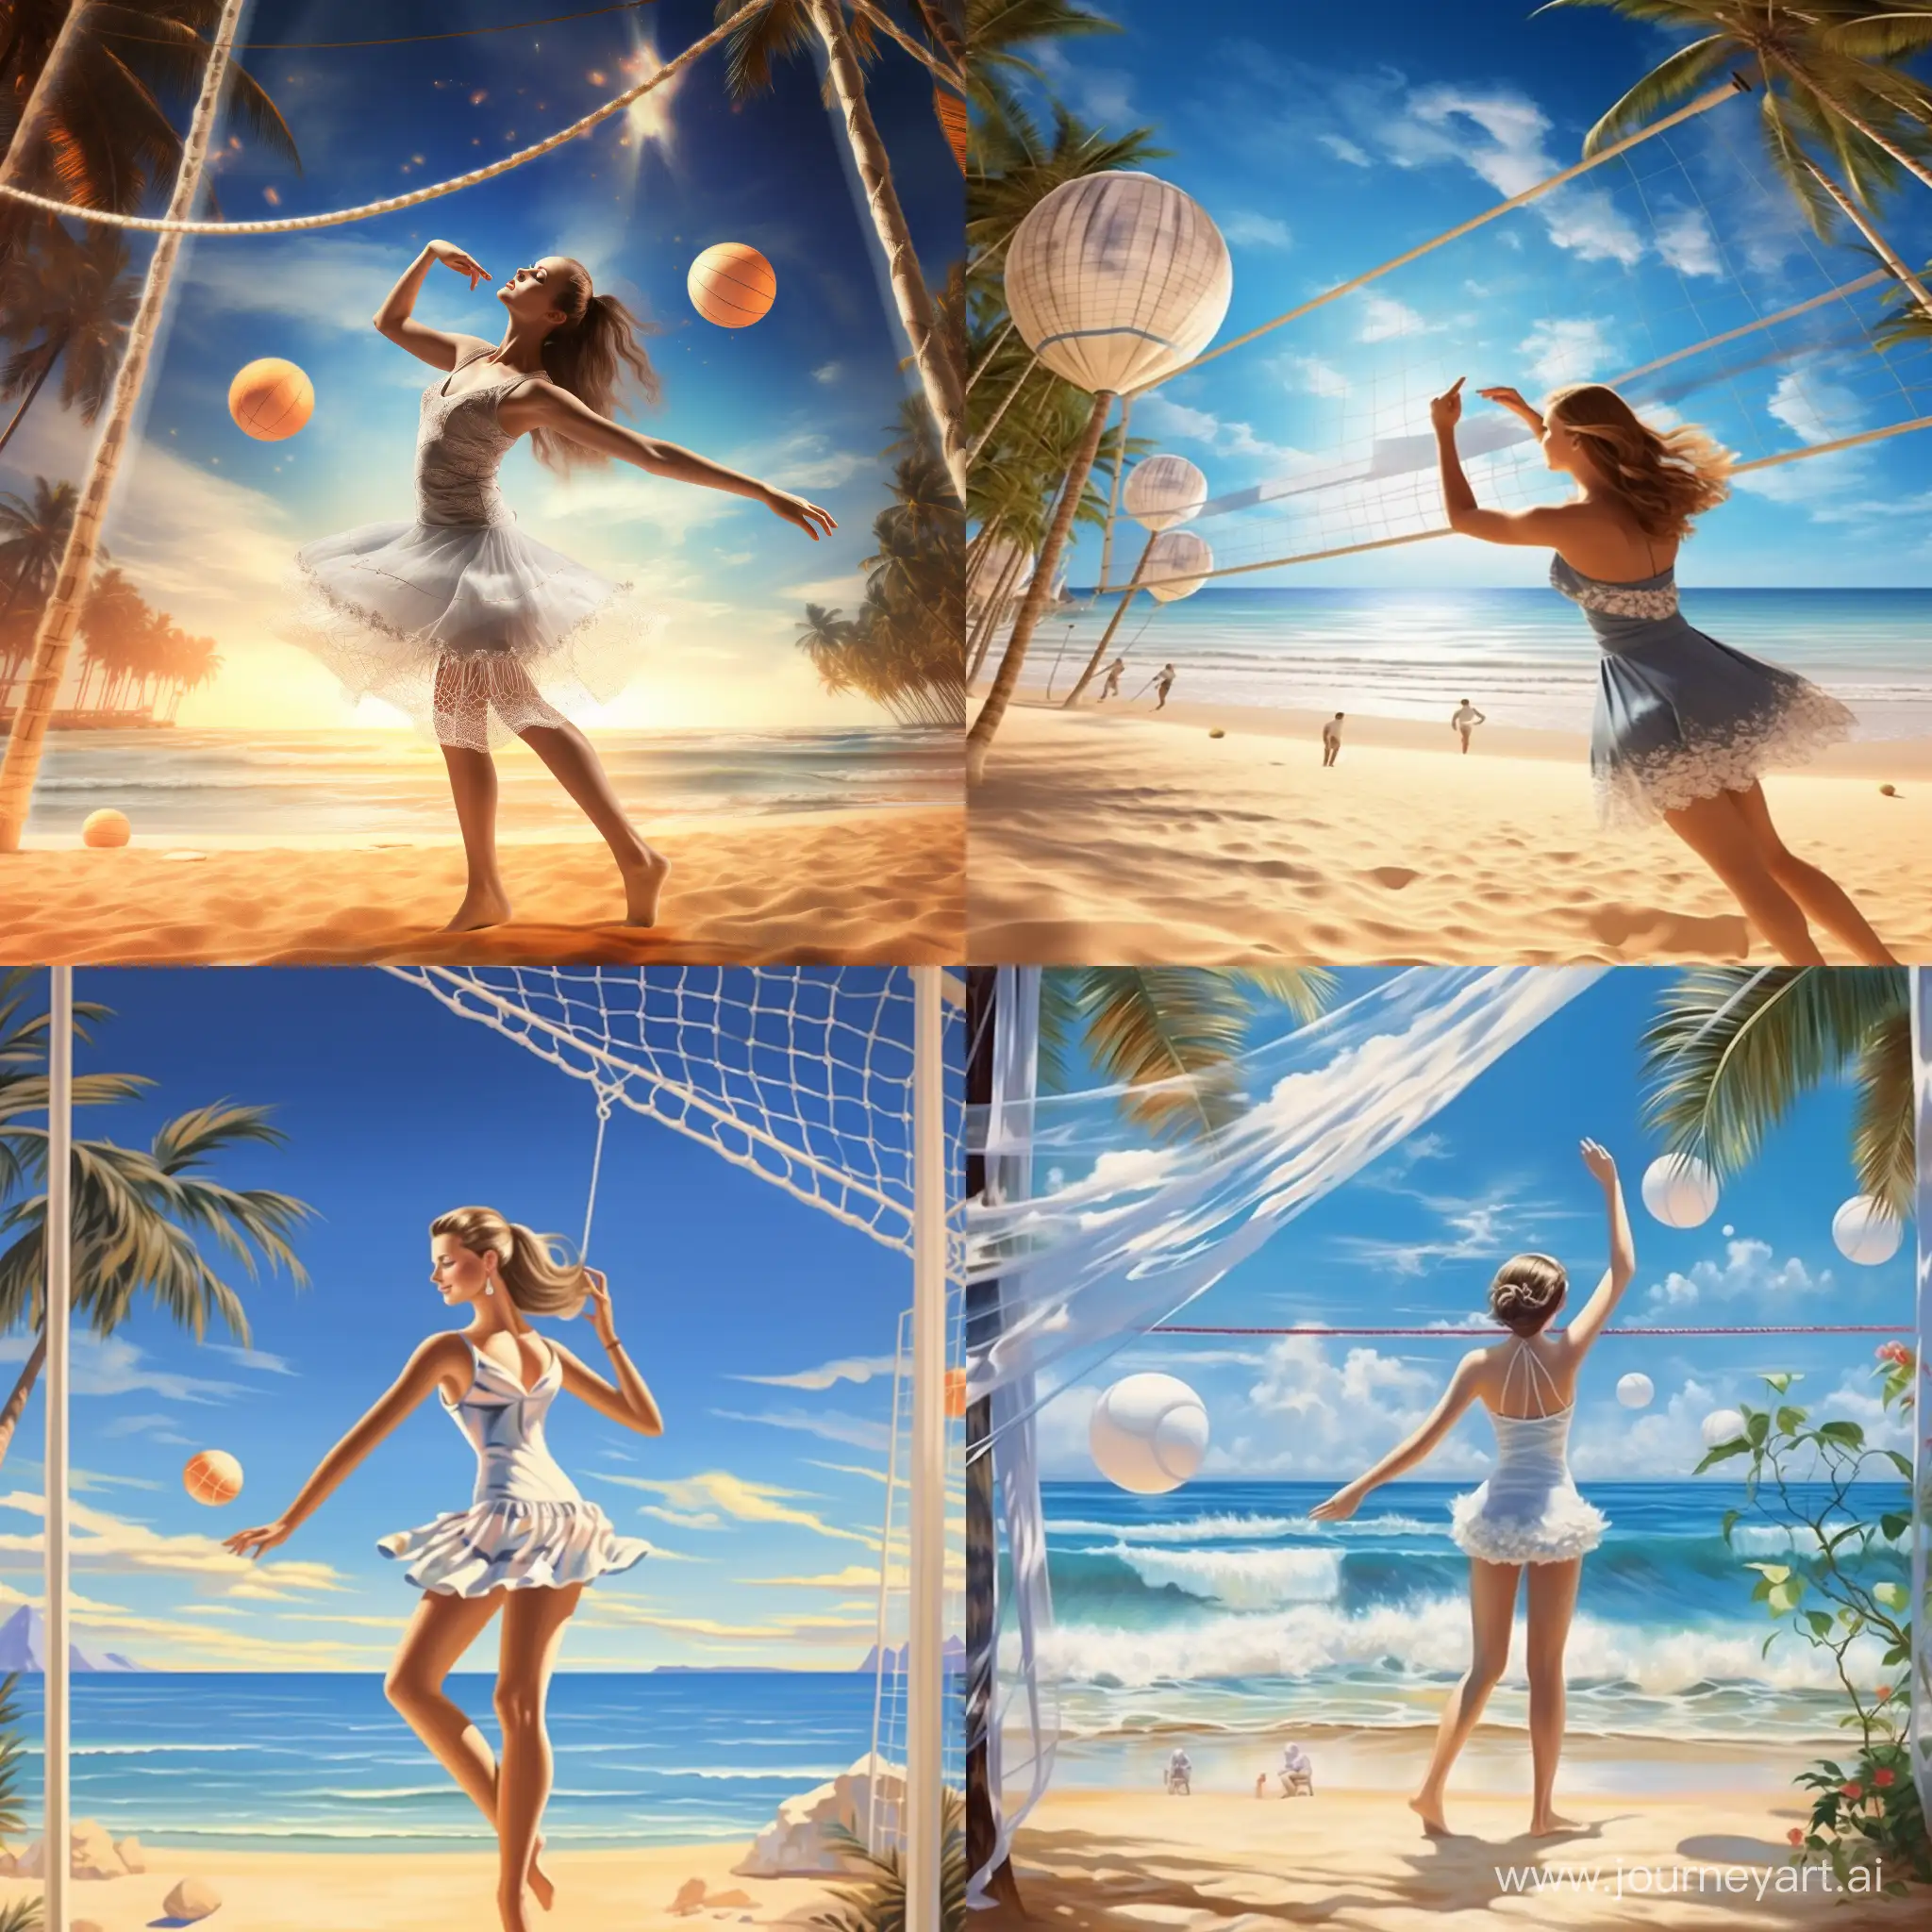 ballerina hits the ball through a volleyball net on the beach by the sea in sunny weather with palm trees, middle plan